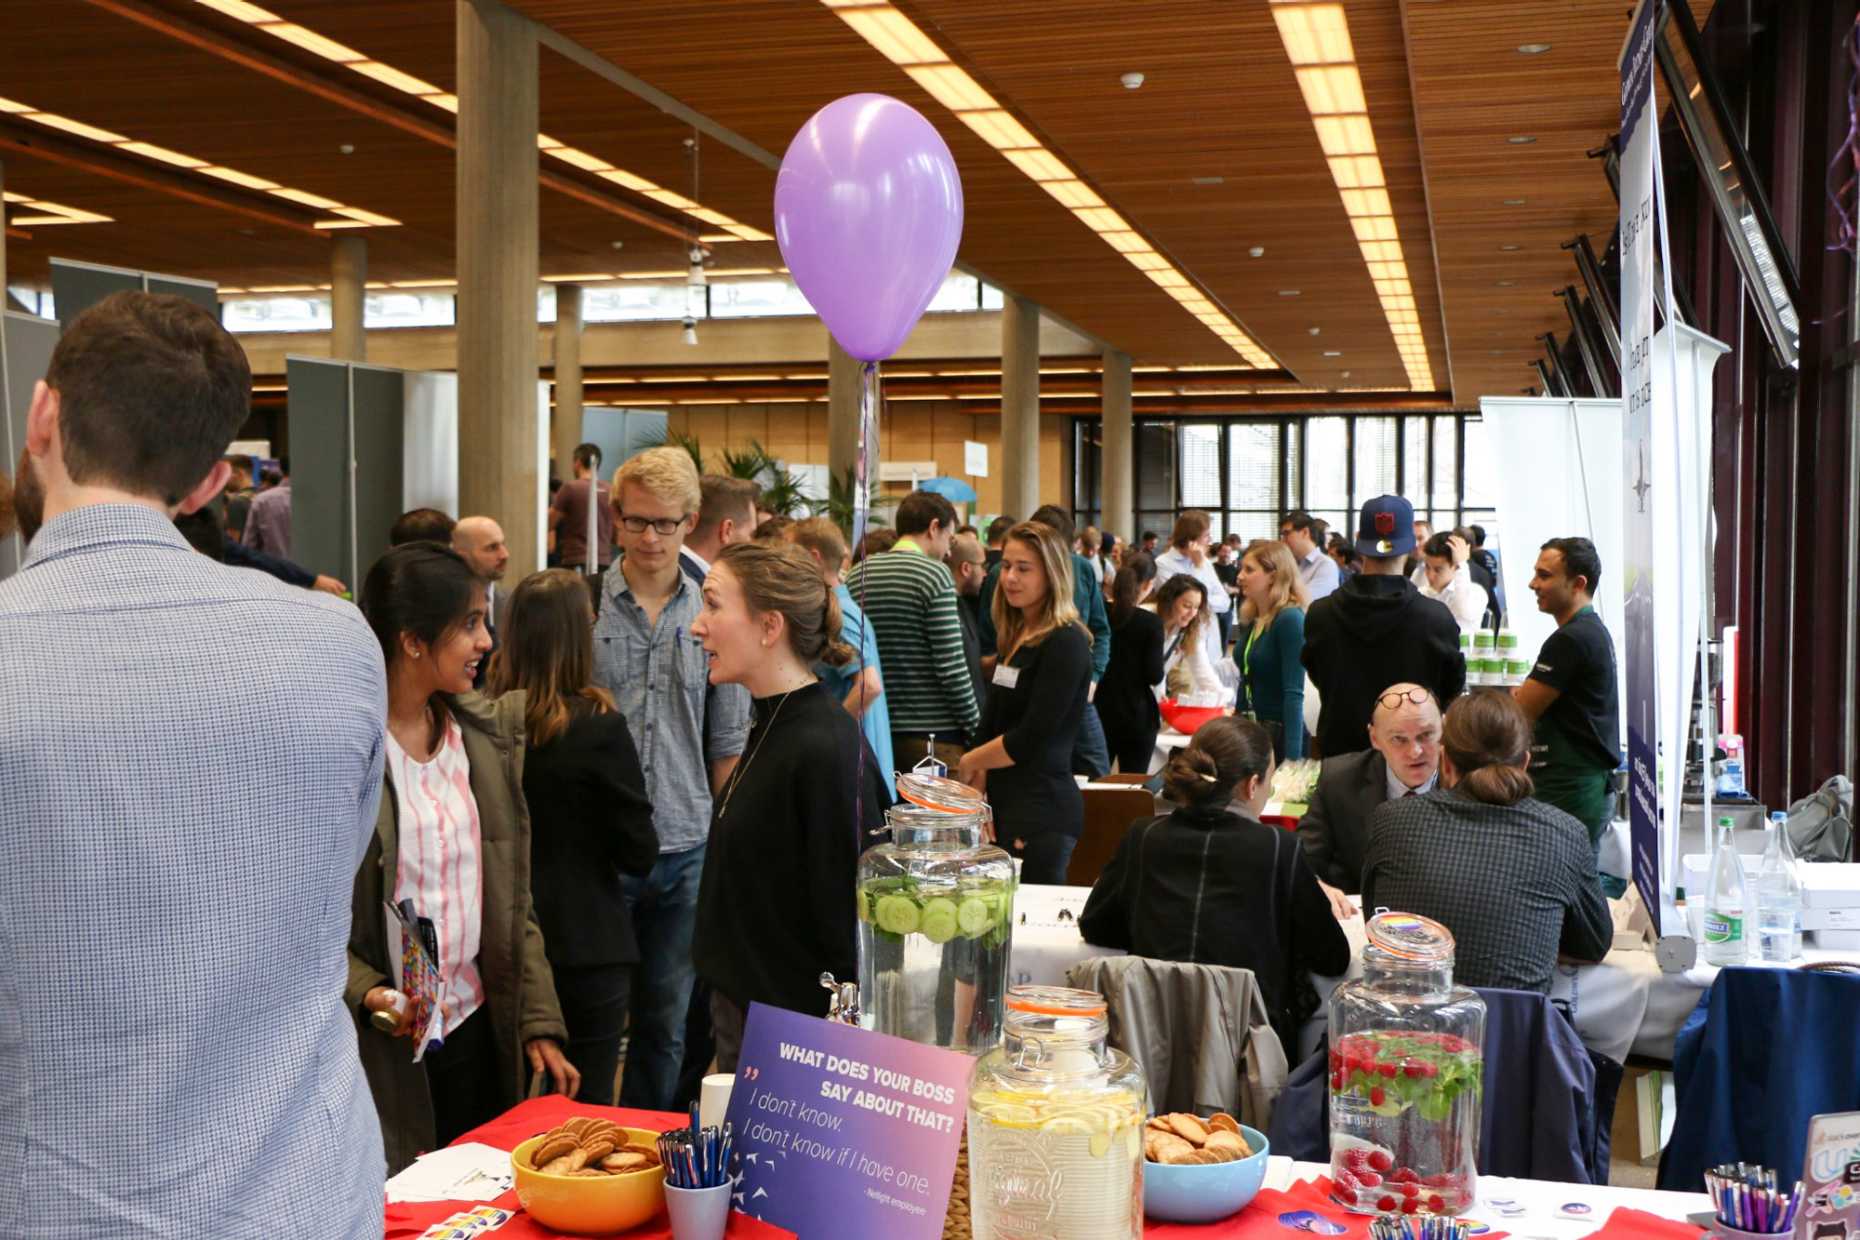 ETH canteen filled with people and exhibition booths, a purple balloon floats above the crowd.